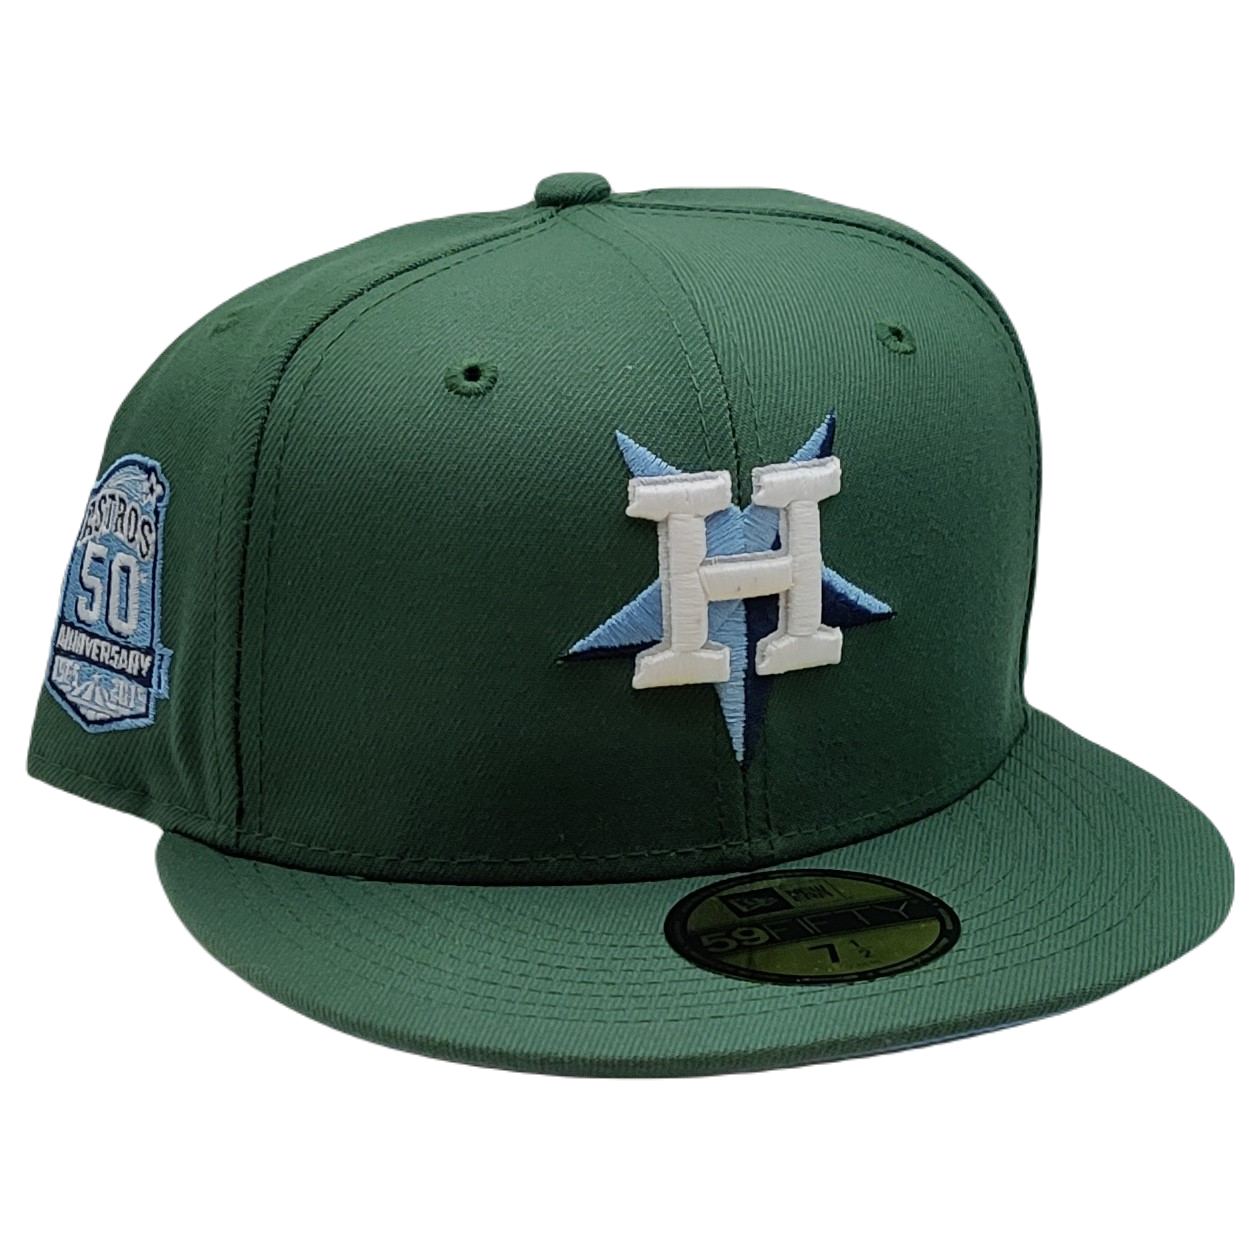 New Era Mens Mlb Asgw Of 59 Fiftyno Patch Houston Astros Hats 12536856